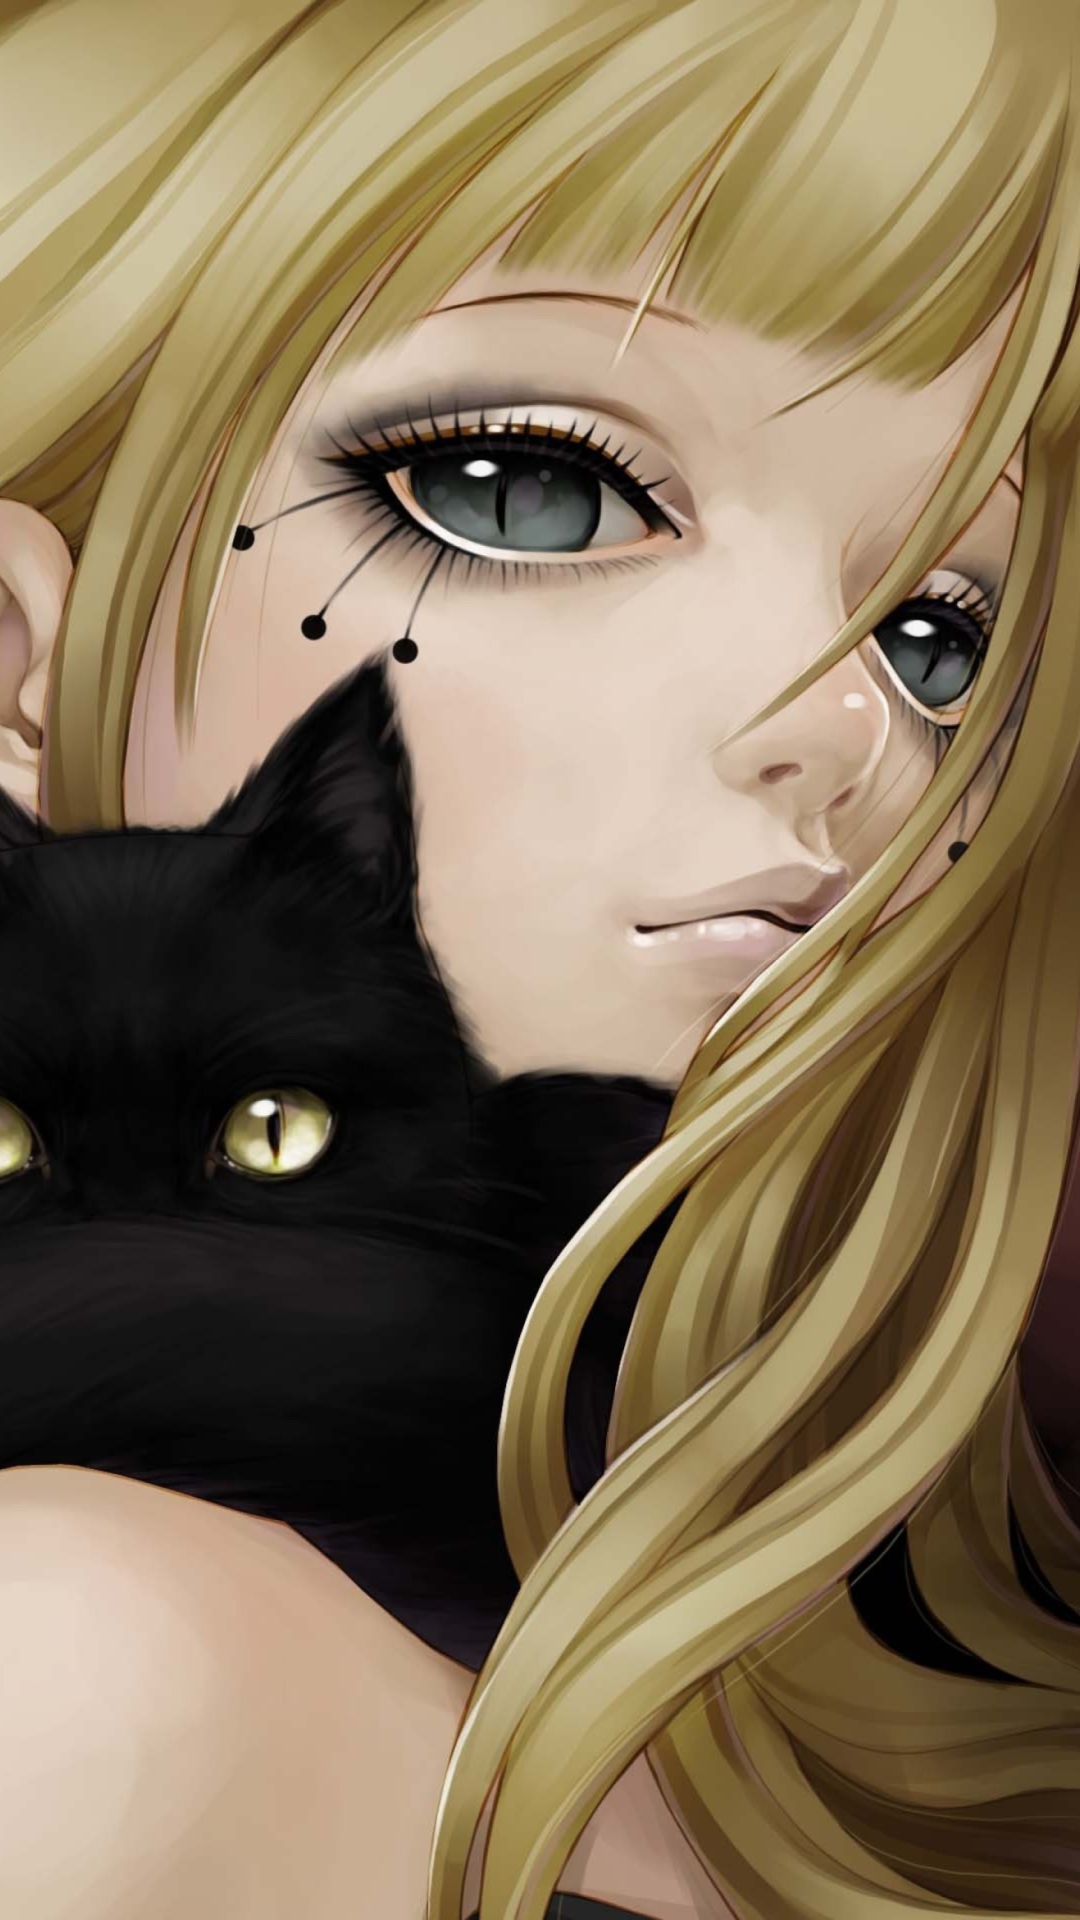 Blonde With Black Cat Drawing wallpaper 1080x1920